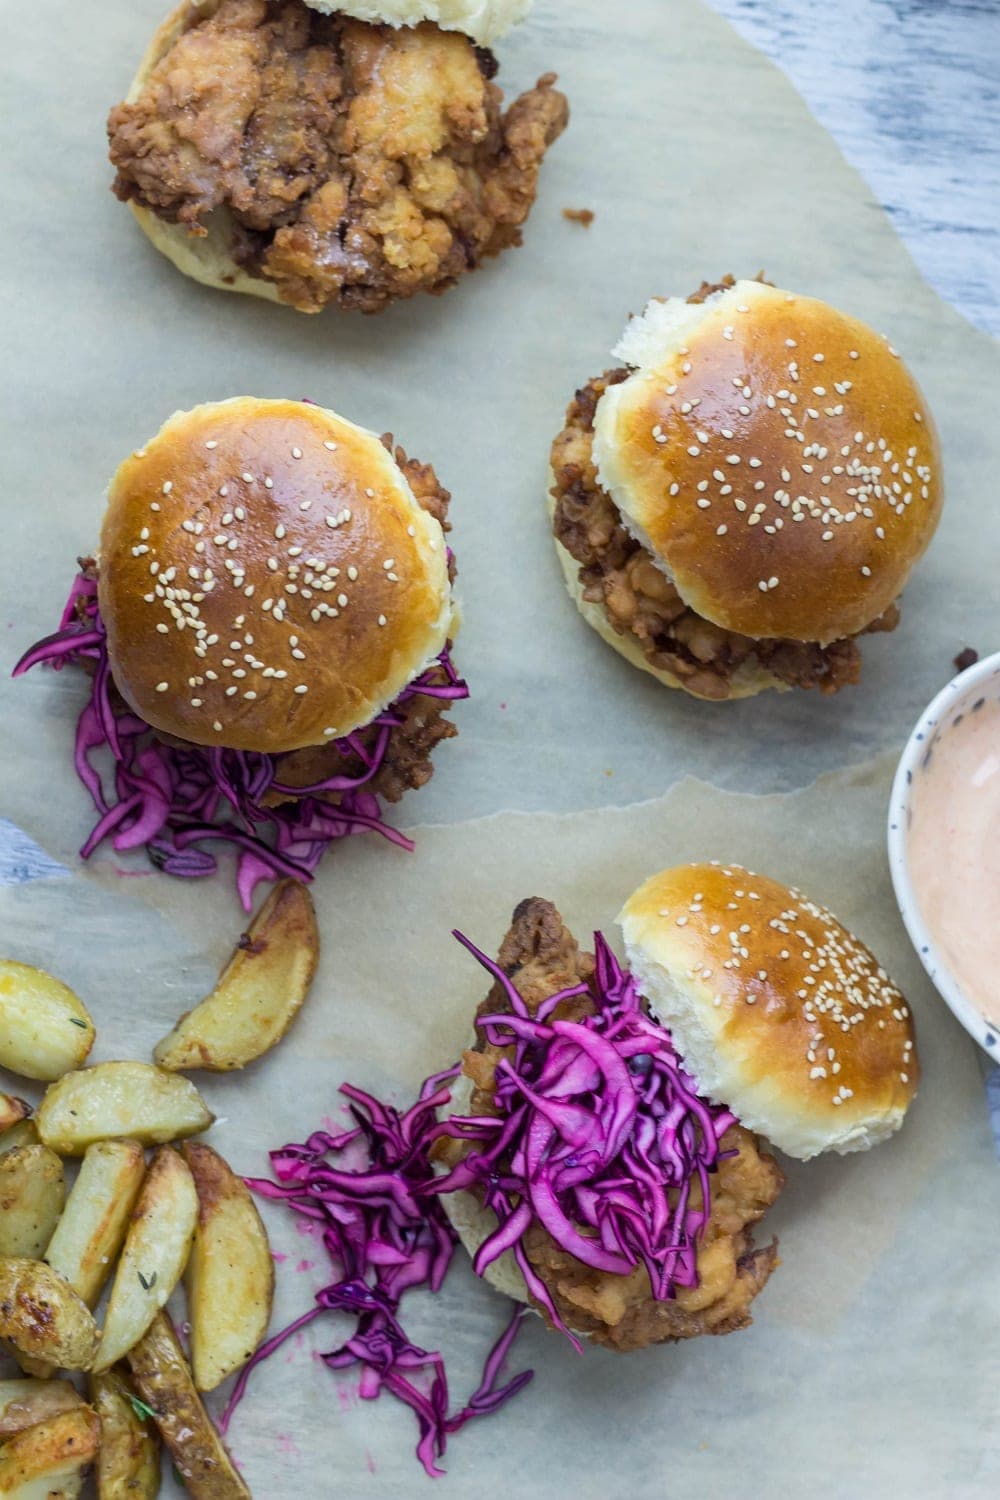 Oh man, fried chicken is just the best isn't it? Especially these buttermilk fried chicken sandwiches with cabbage slaw and sriracha mayo!